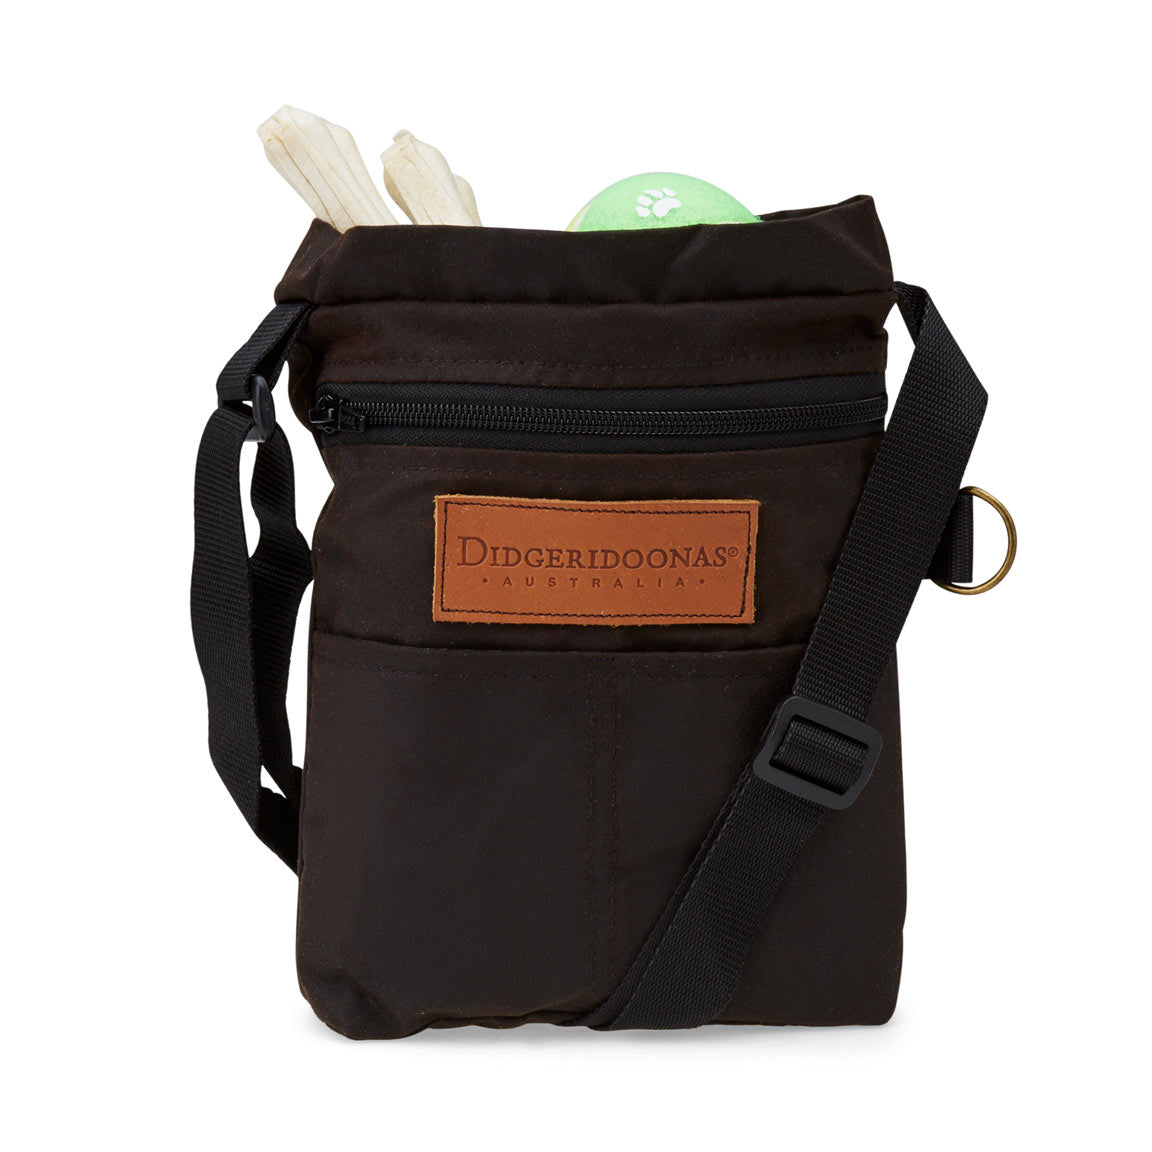 Dog Walkers Carry All Snuffles doesn’t have pockets. You need your pockets for your people stuff and your hands for Snuffles’s lead. So how do you carry Snuffles’s things? Well, this is Australian oilskin bag is our solution!